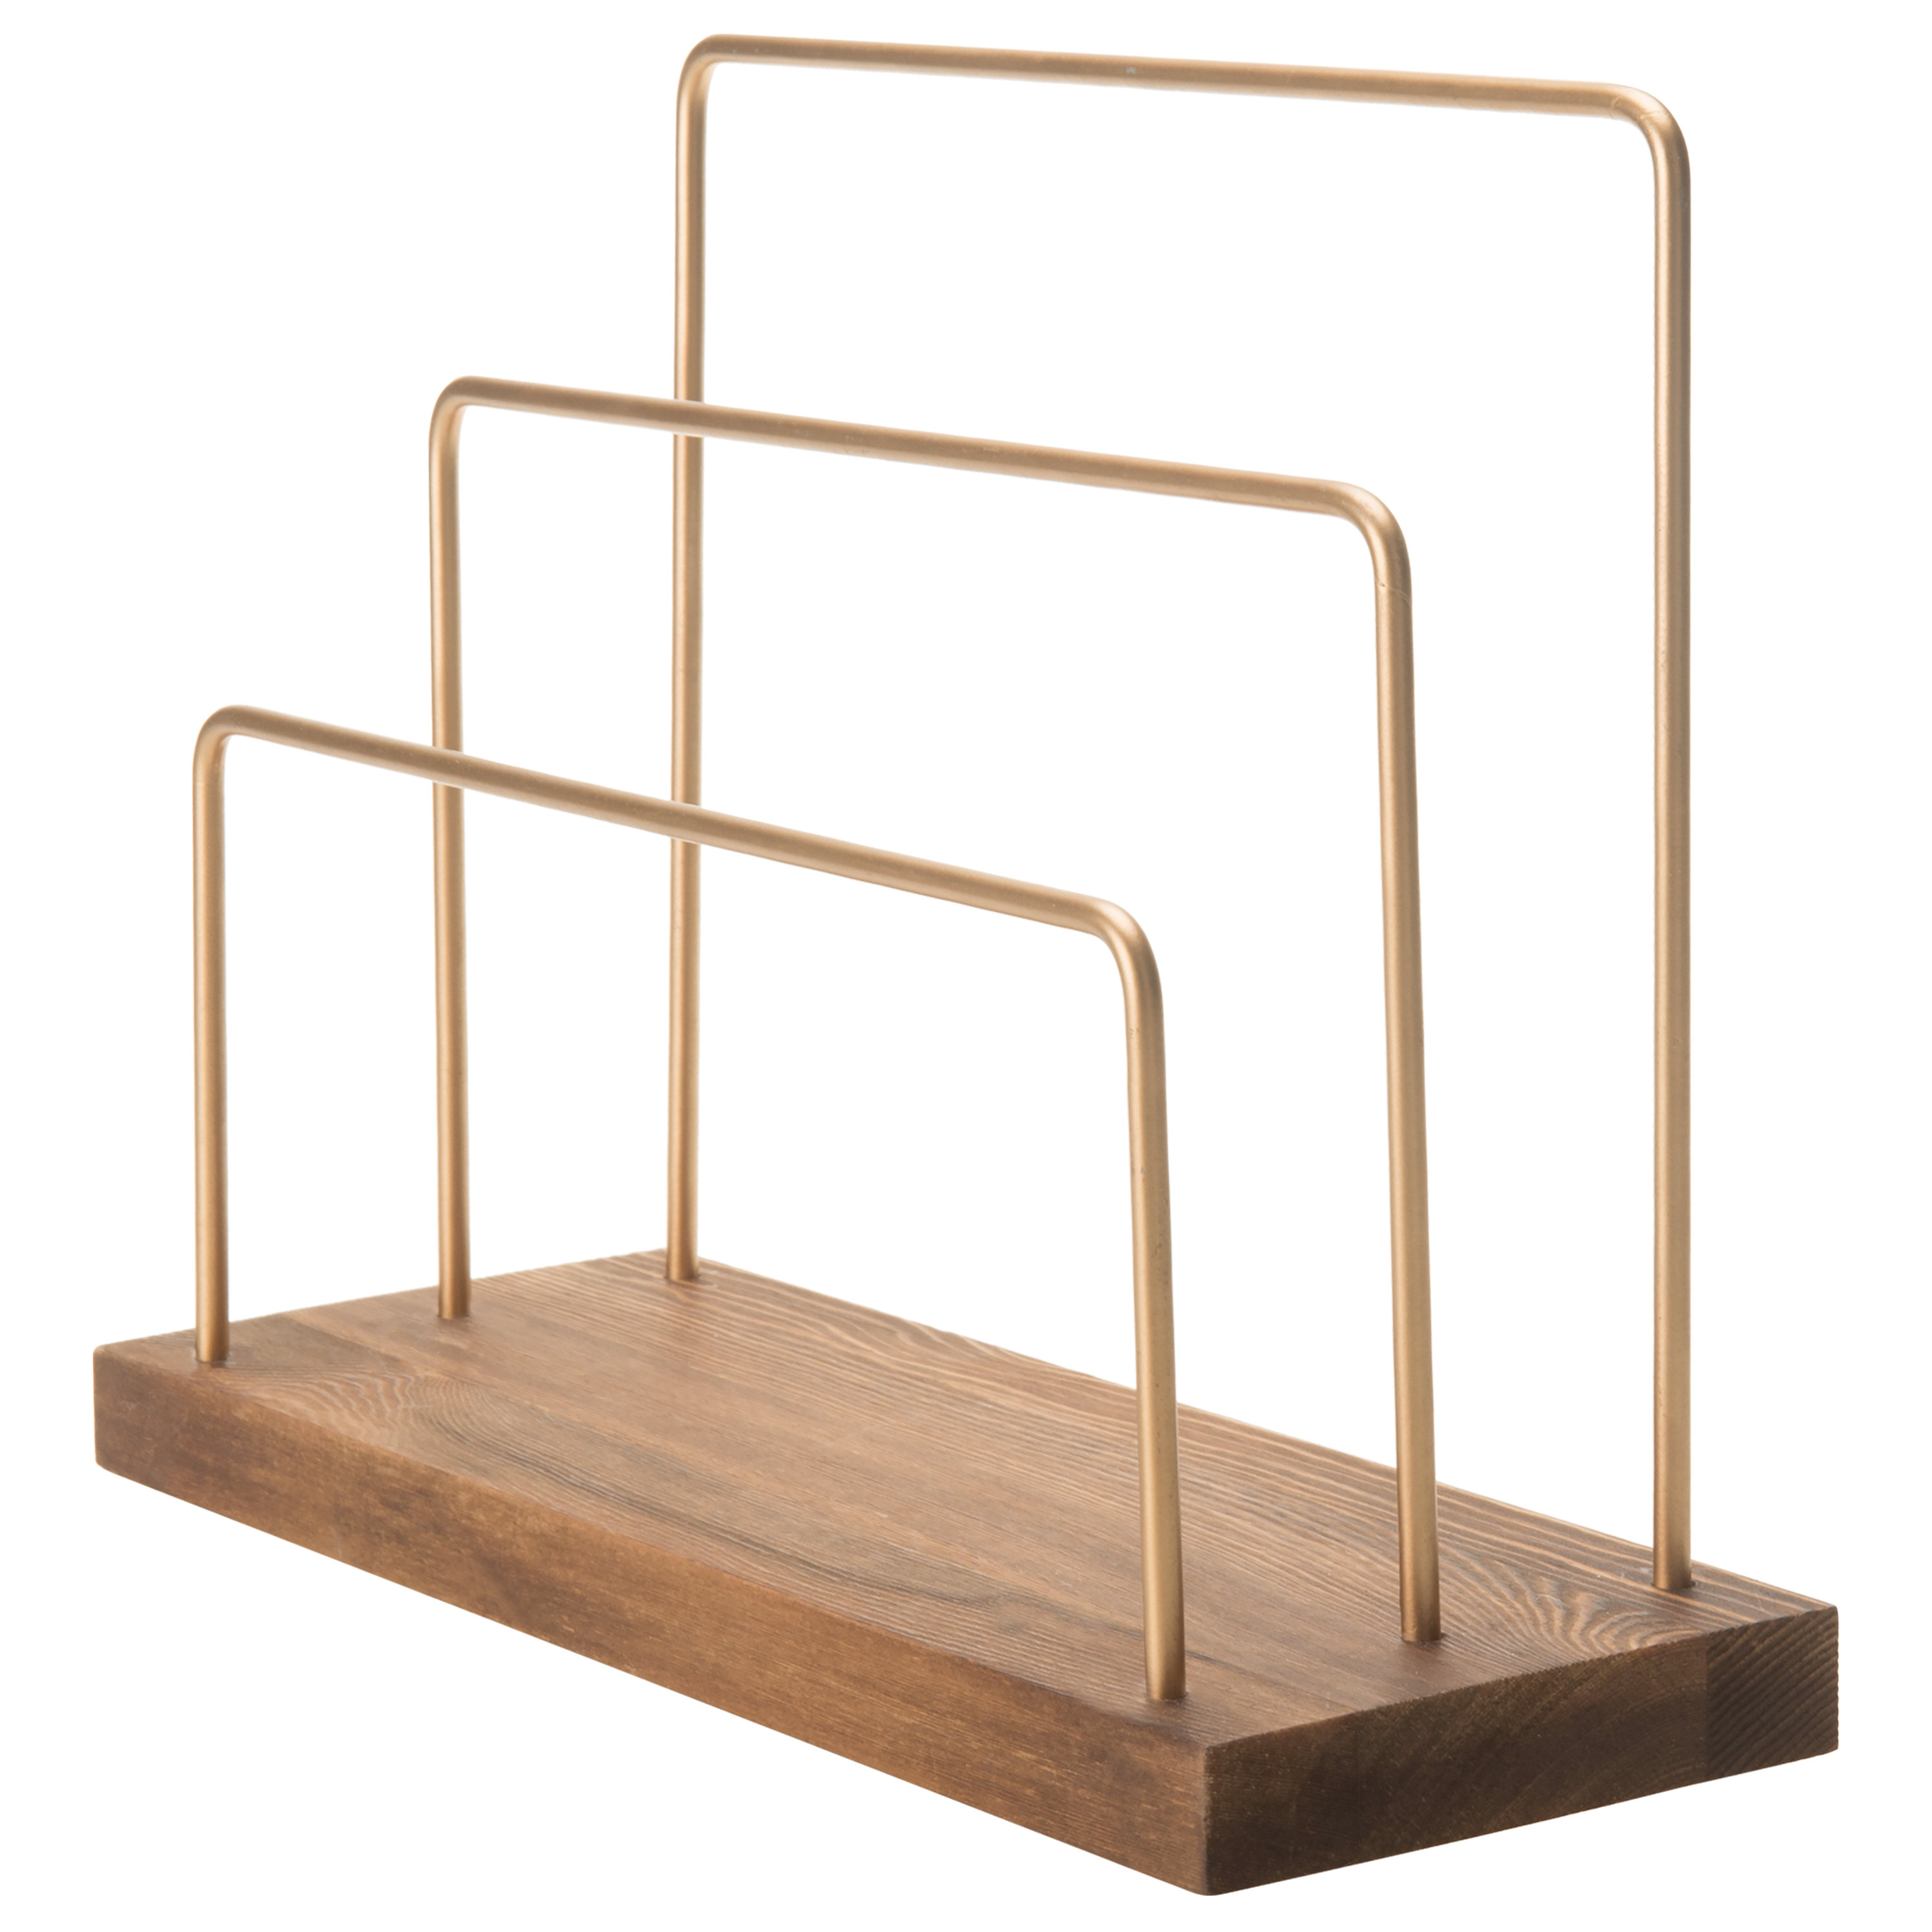 Everly Quinn 3 Tiered Tabletop Jewelry Stand | Wayfair